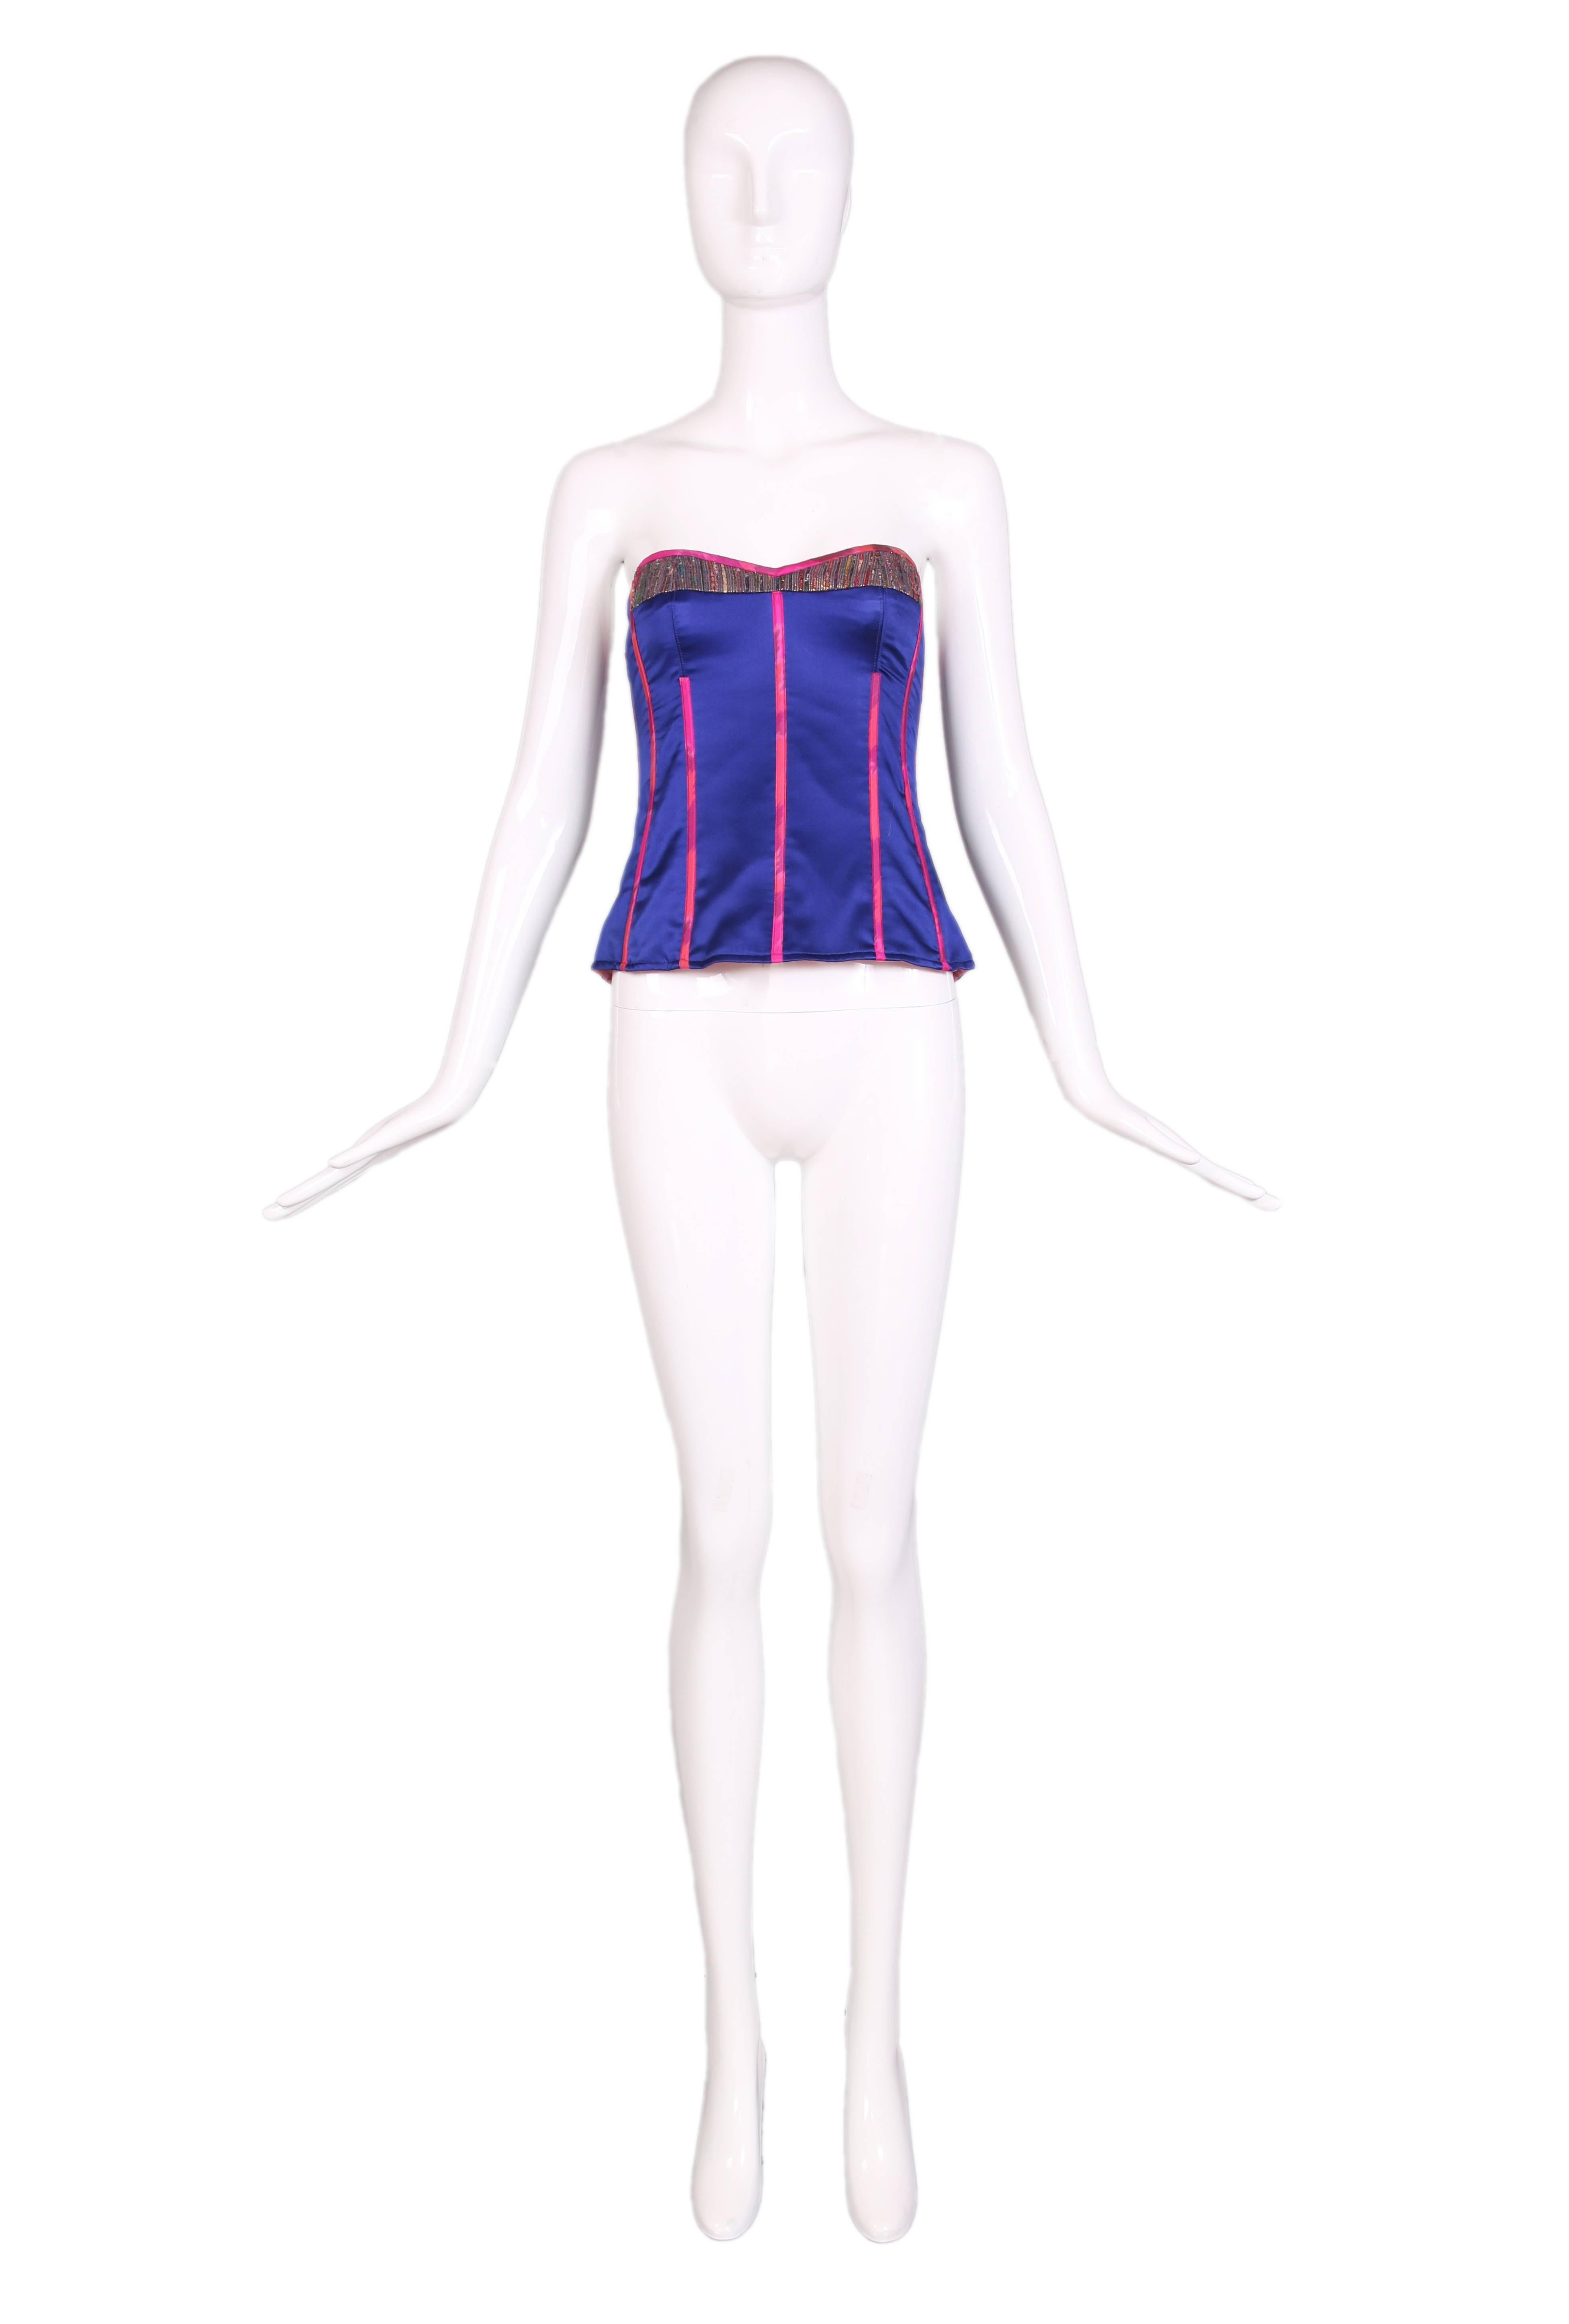 Tracy Feith royal purple silk bustier with hot pink trim and multi-colored lurex ethnic inset detail at top. Back zipper closure. In excellent condition. Size US 1.
MEASUREMENTS:
Bust - 32